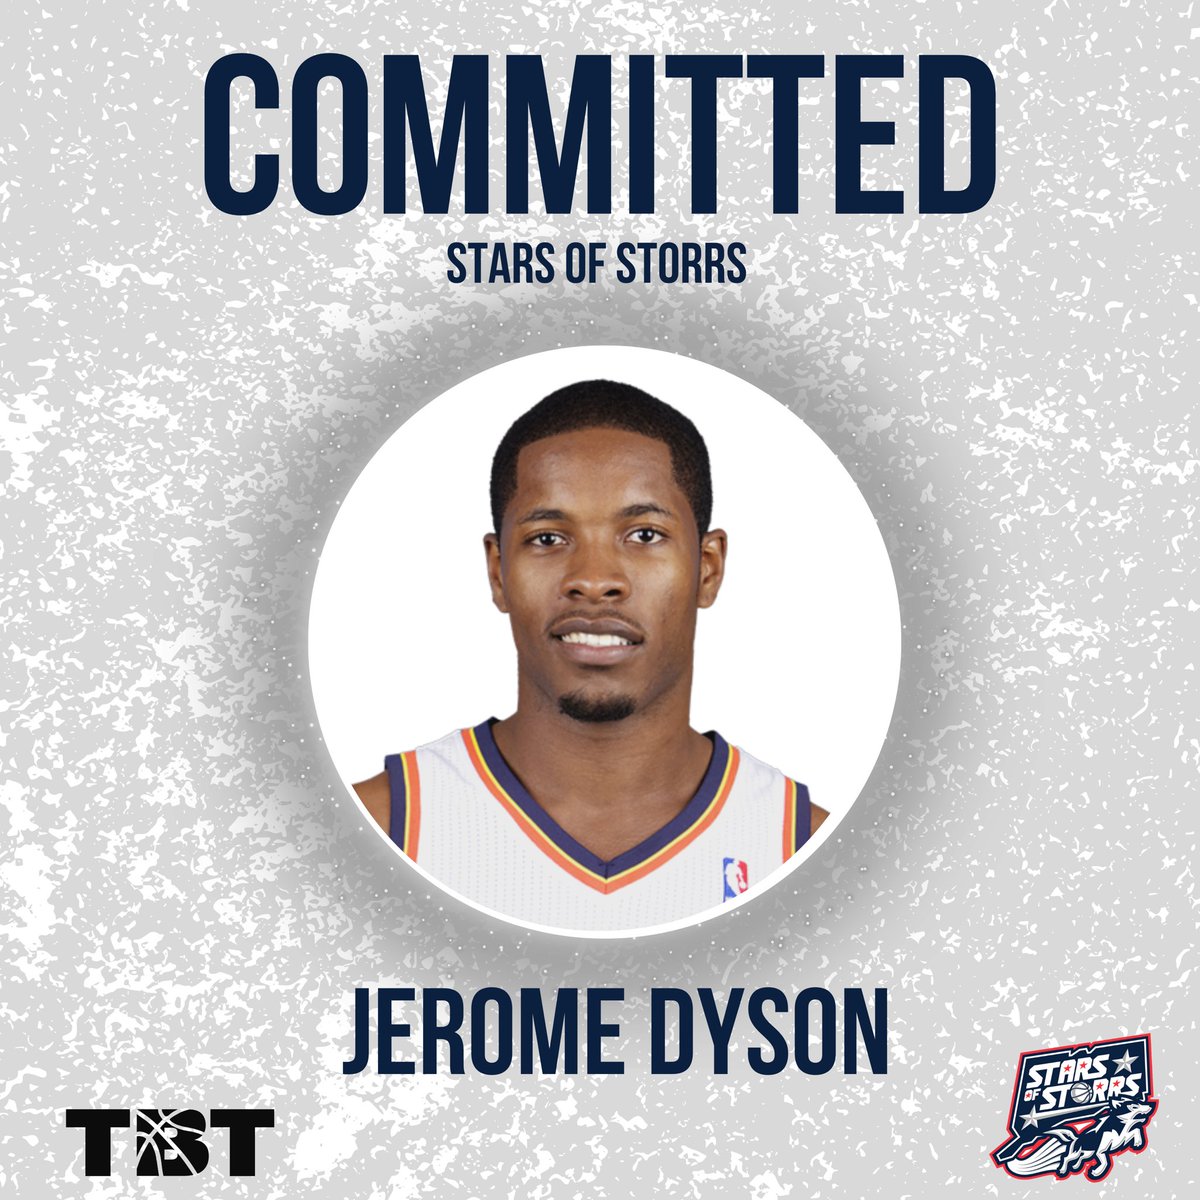 🚨 JEROME DYSON COMMITS TO THE STARS OF STORRS 🚨